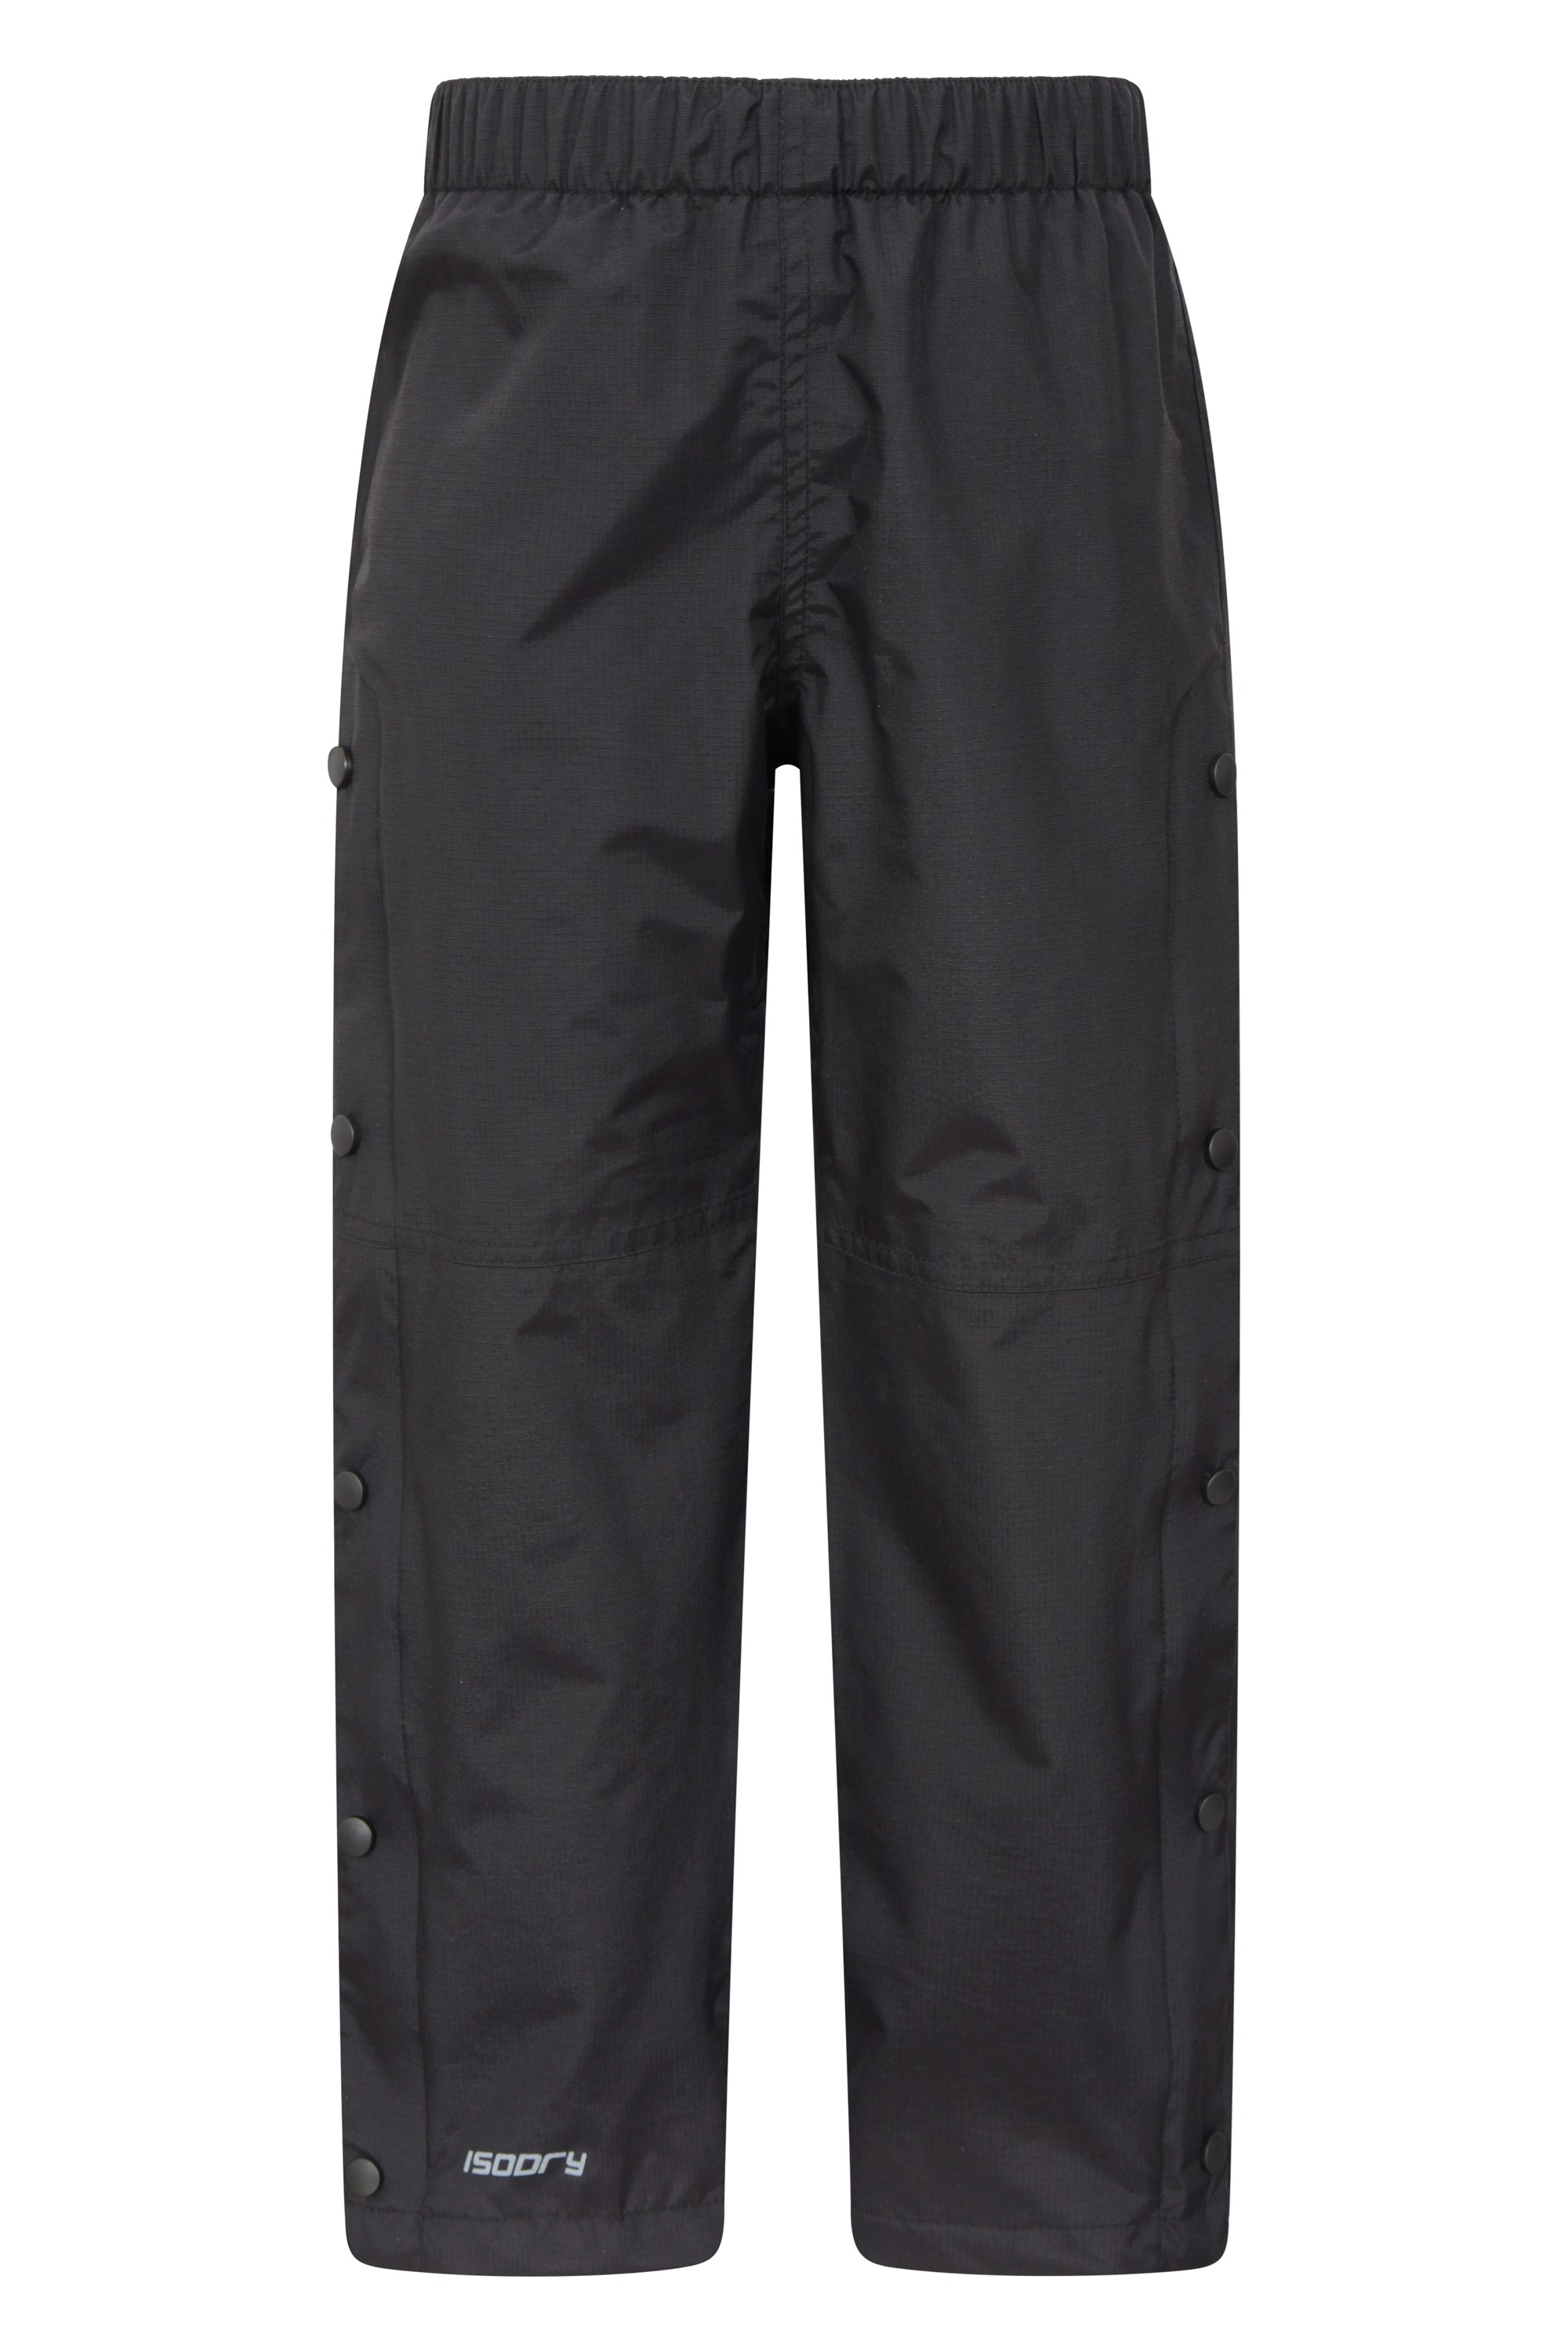 childrens waterproof trousers go outdoors